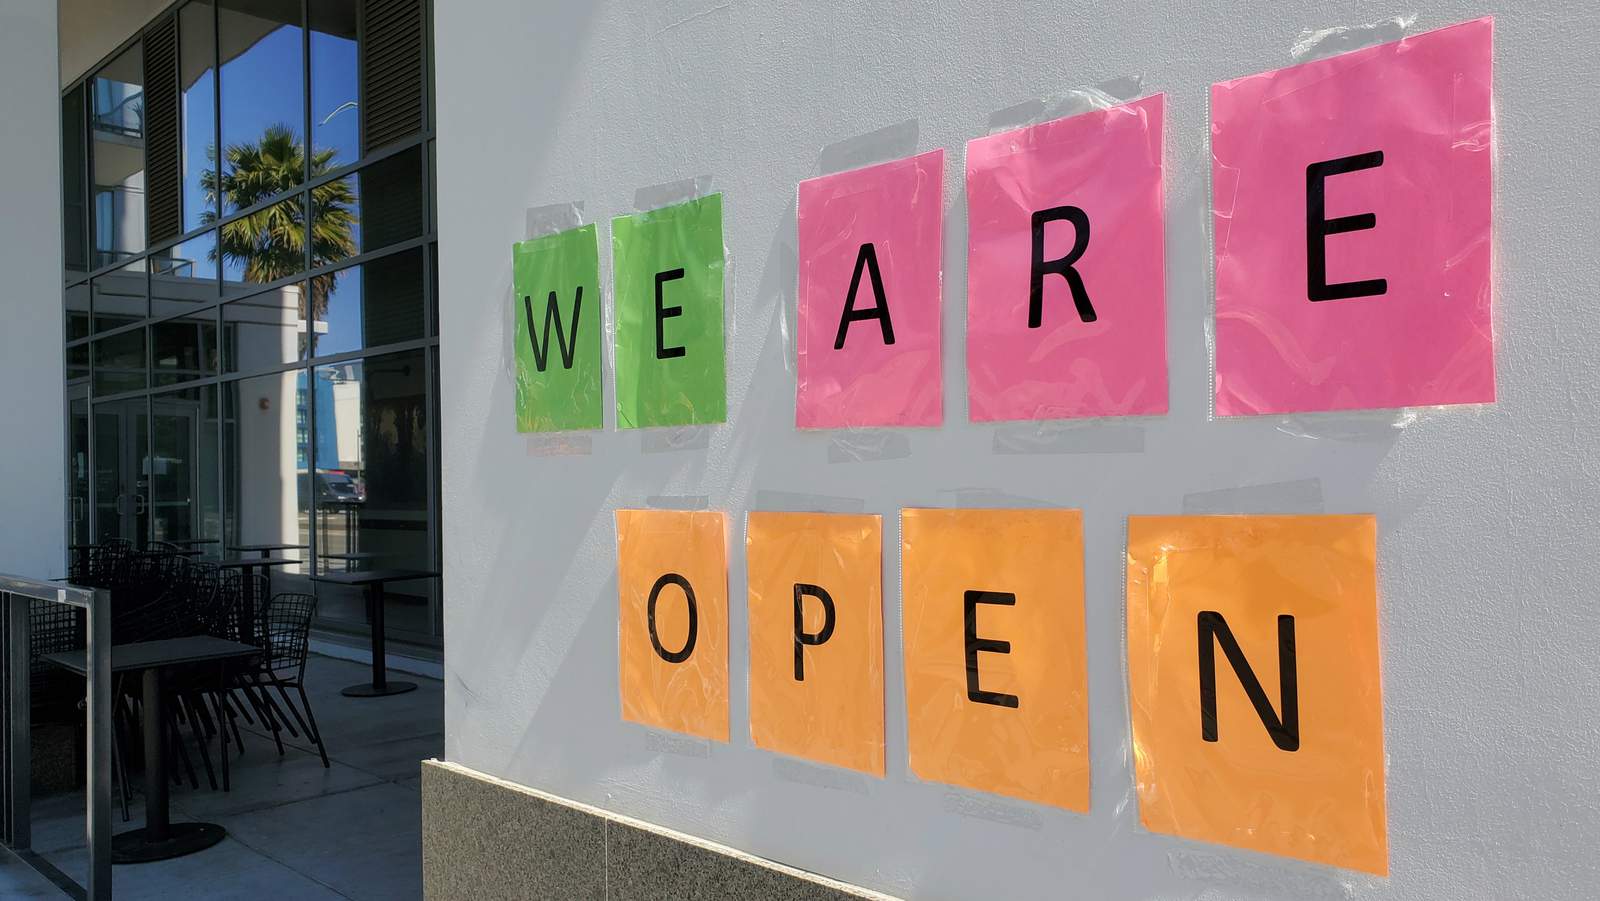 Who’s open for business in Jacksonville? Let us know